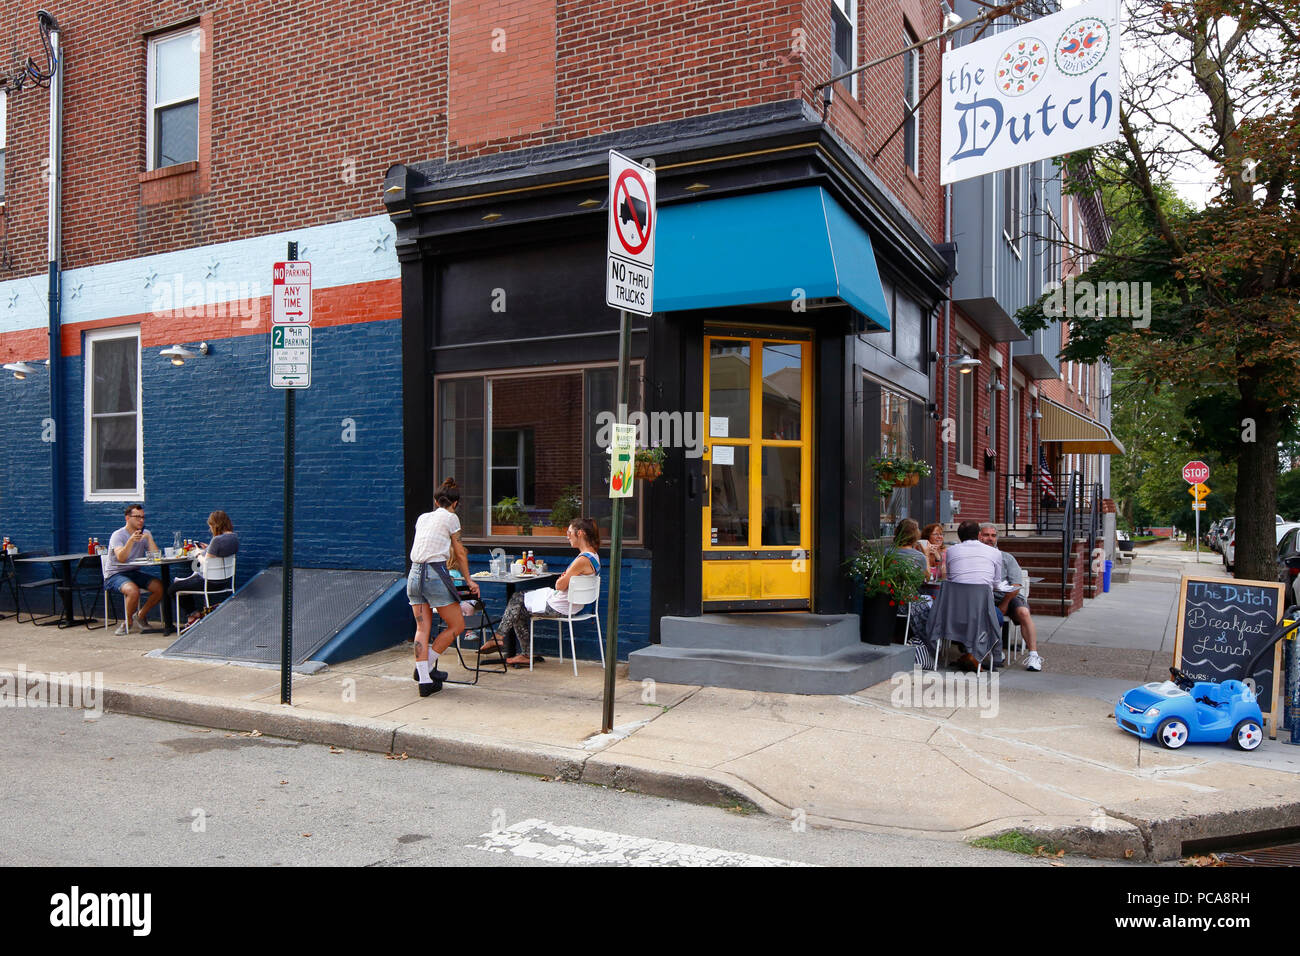 The Dutch, 1527 S 4th St, Philadelphia, PA. exterior storefront of a  restaurant, and sidewalk cafe in dickenson square Stock Photo